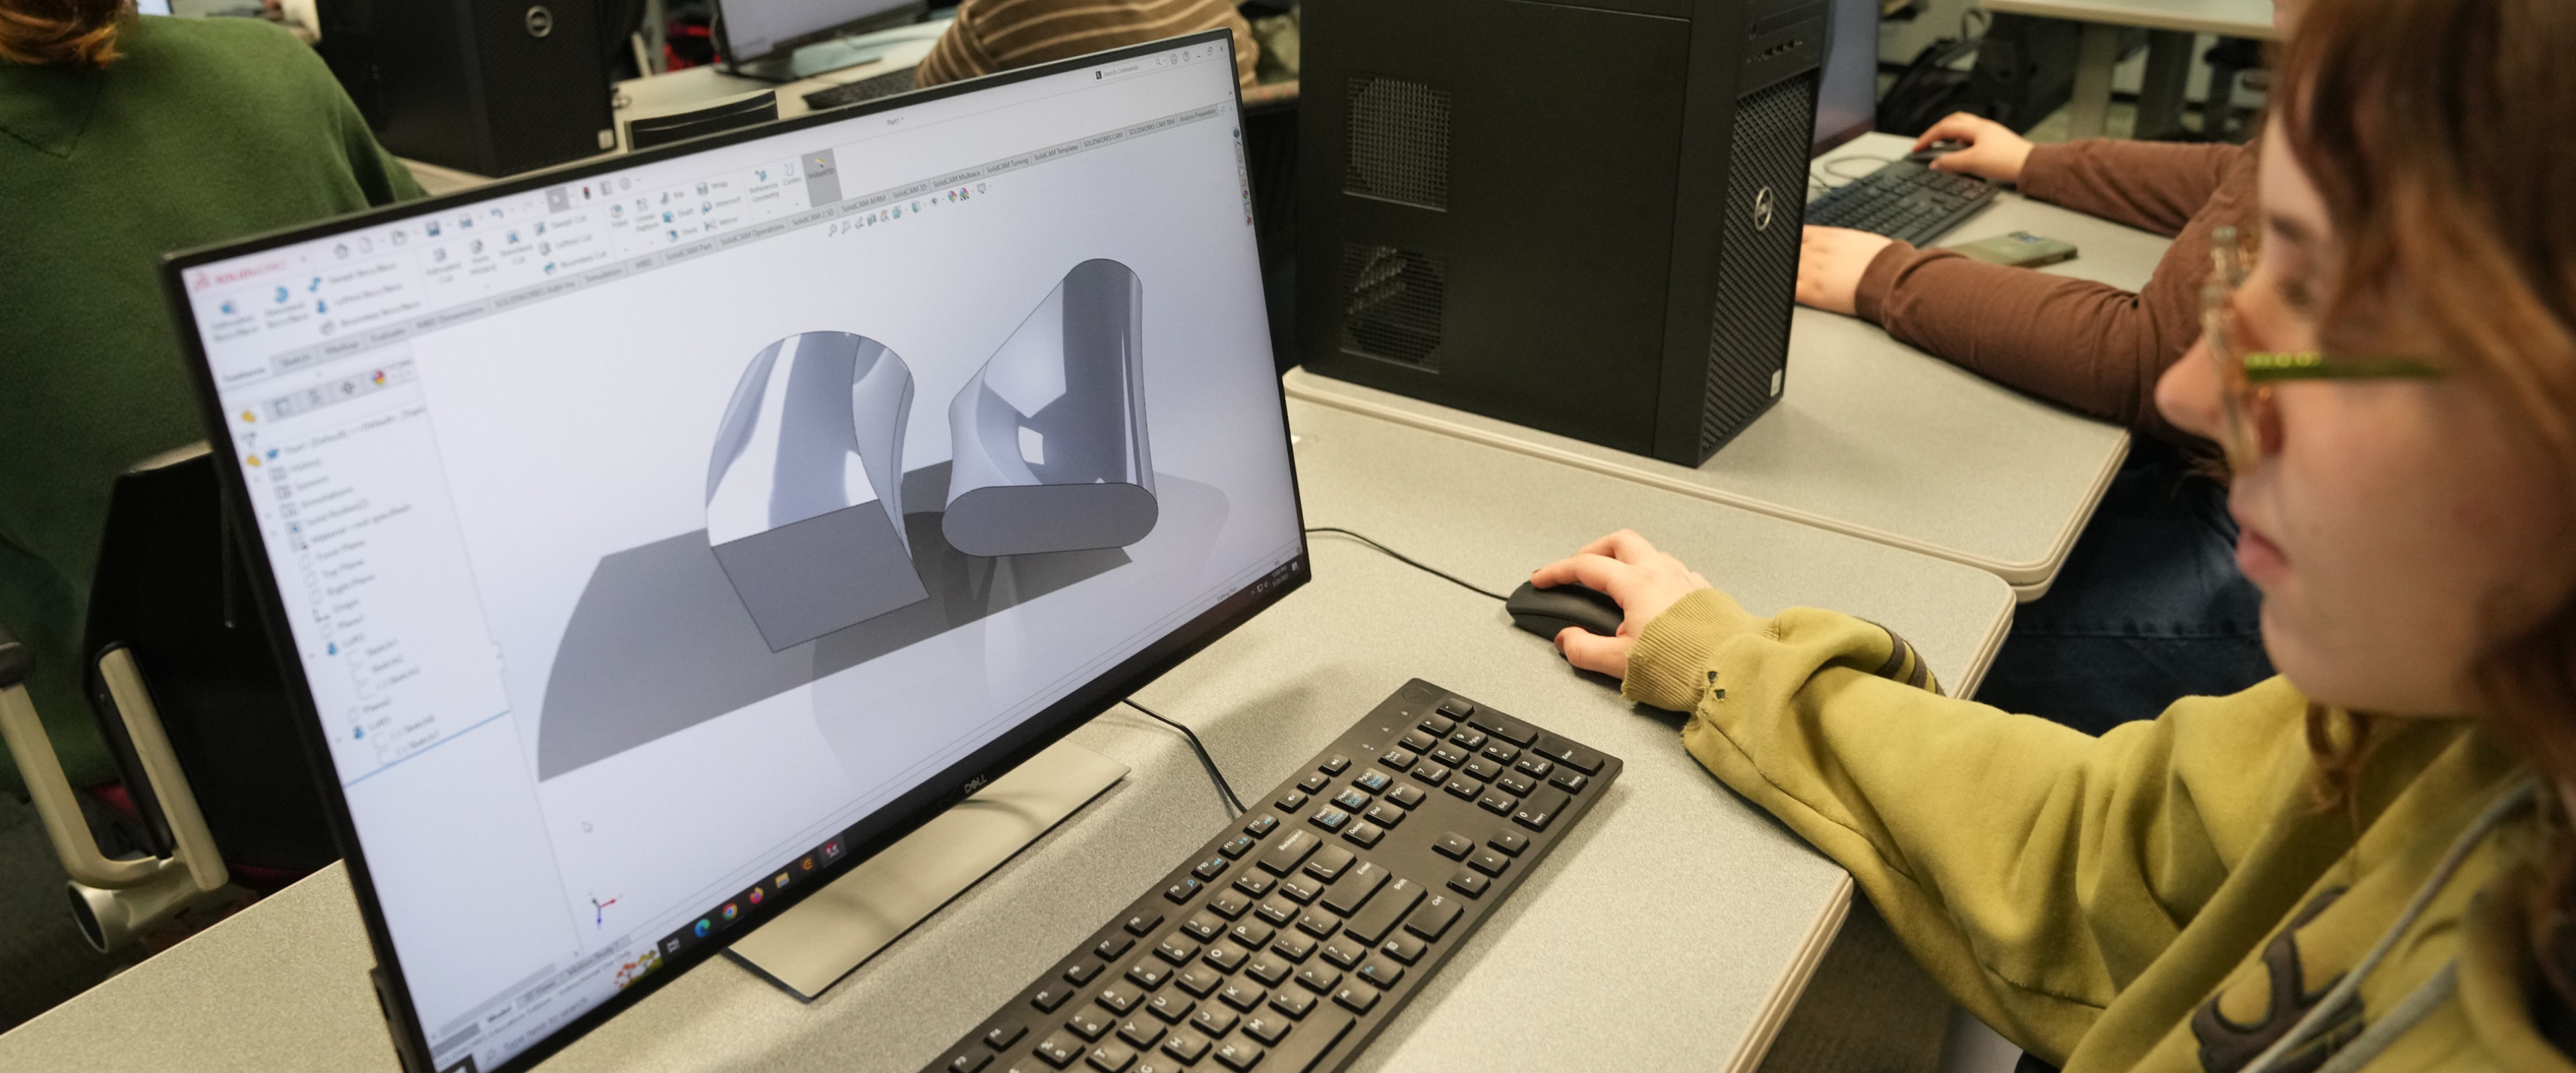 Student working with modeling software at computer station